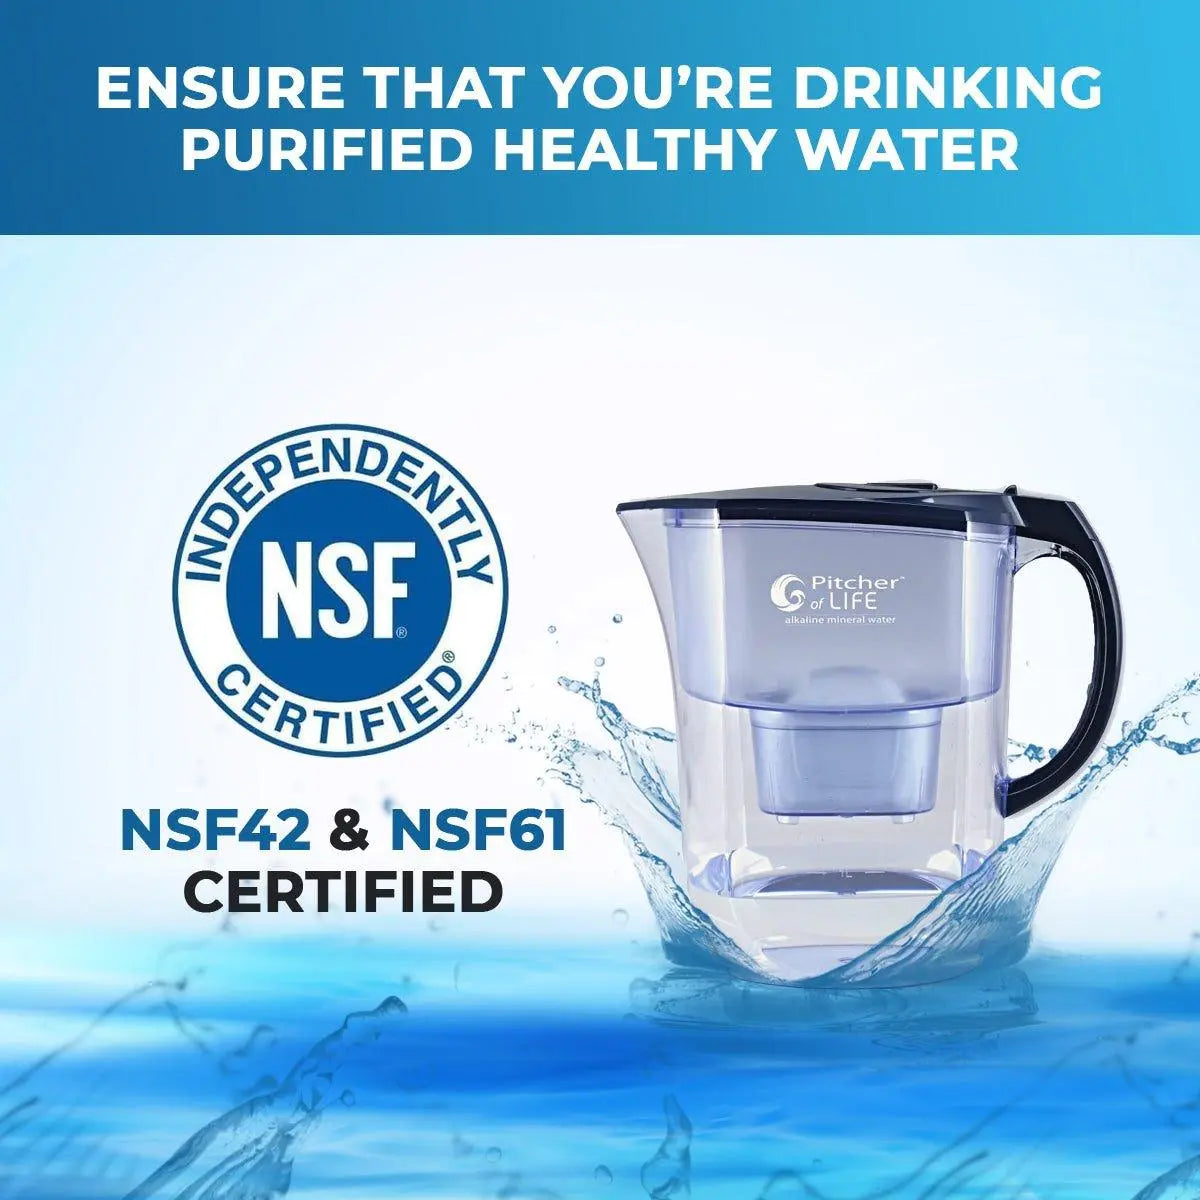 drink purified healthy water